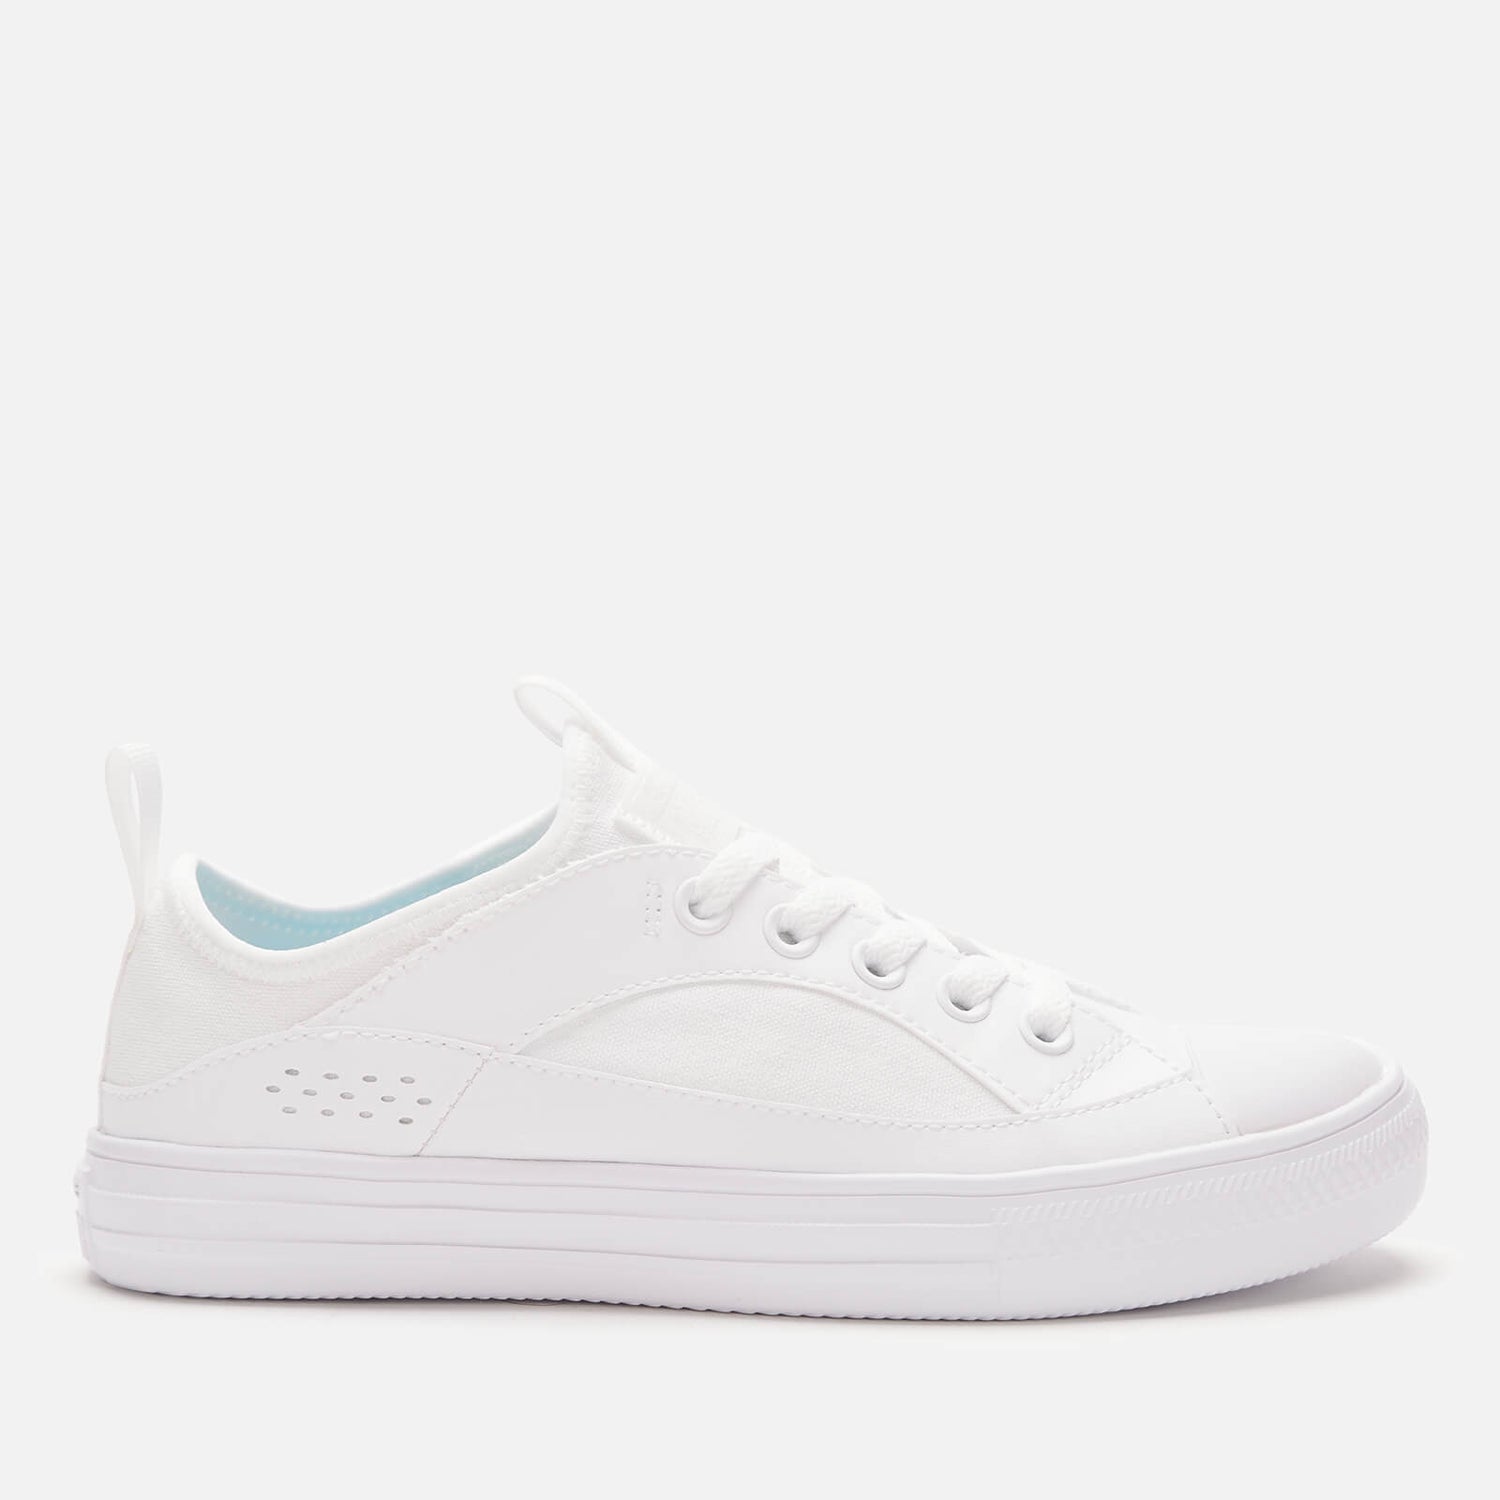 Converse Women's Chuck Taylor All Star Wave Ultra Ox Trainers - White/White/White - UK 3